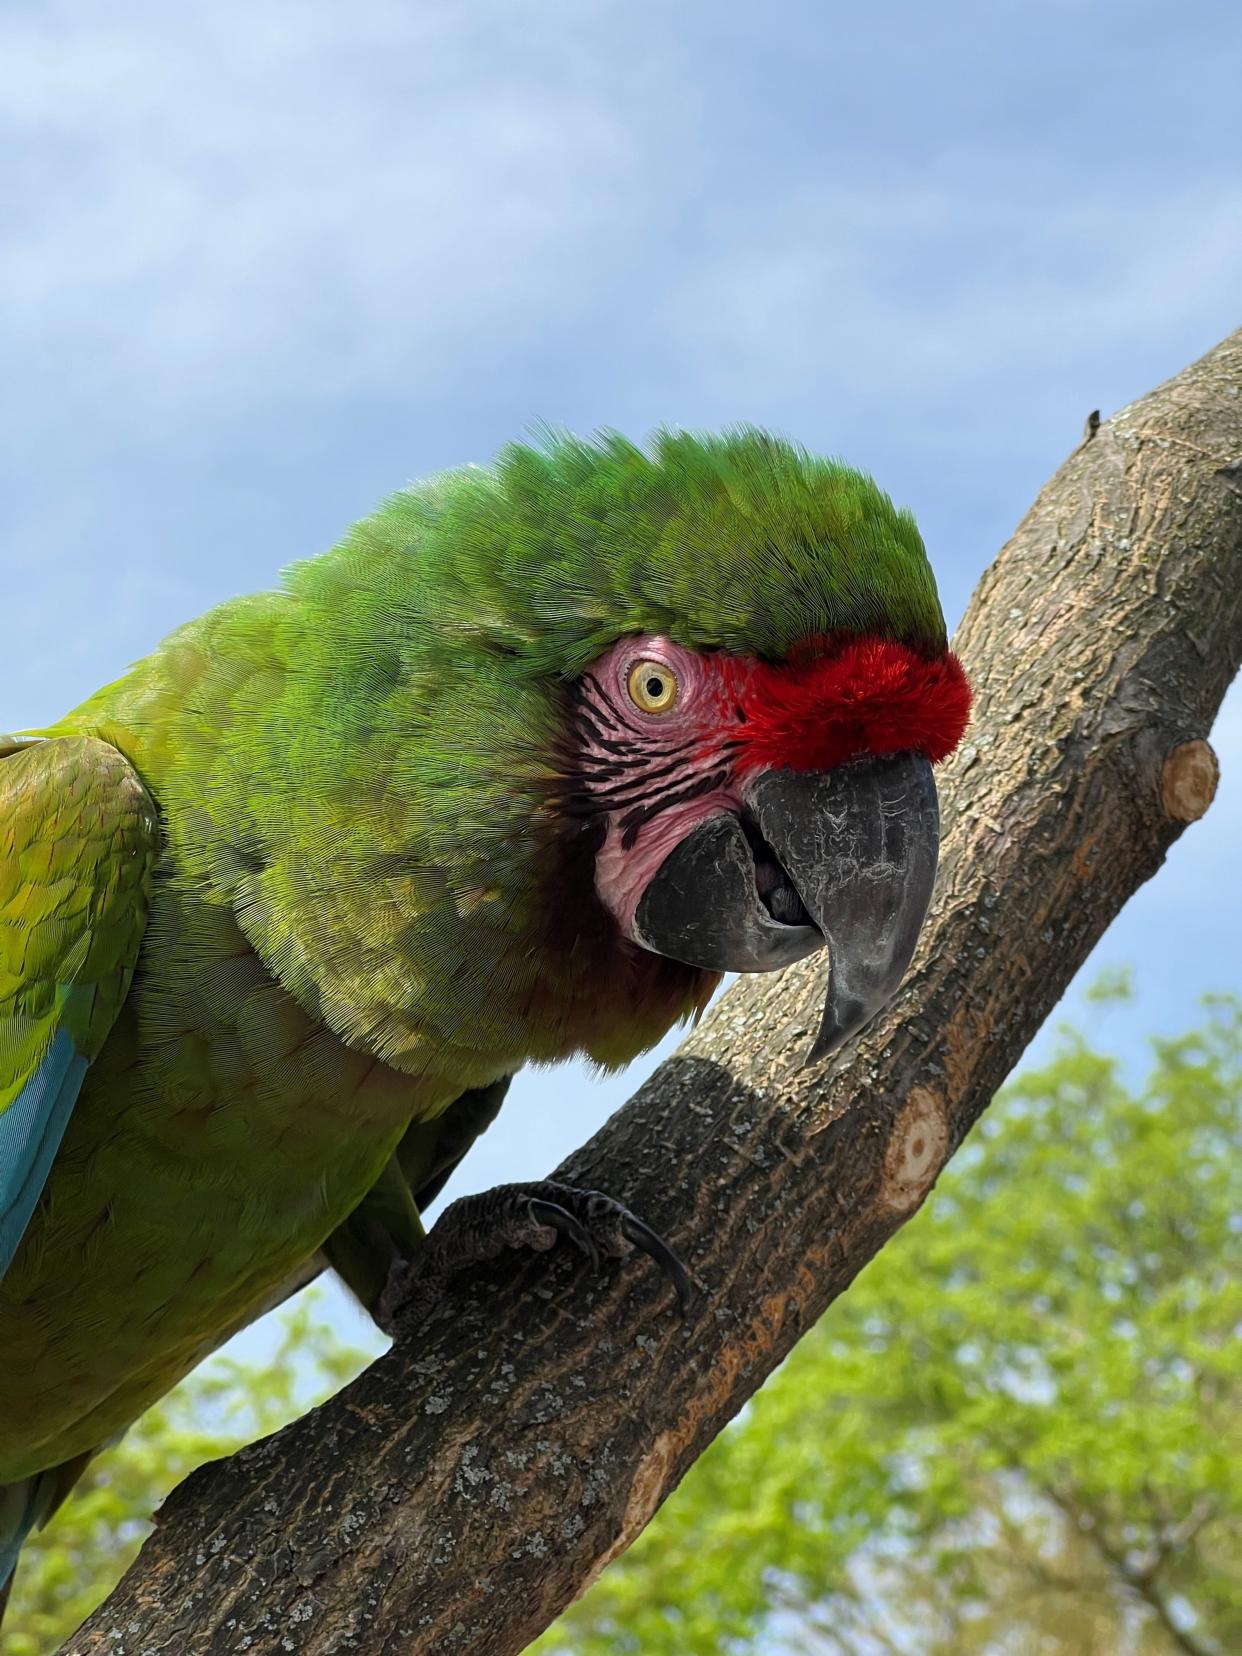 Hiro, one of three macaws that made took a tour beyond the Roger Williams Park and Zoo Wednesday, pulled an "all-nighter" and was recovered Thursday morning.